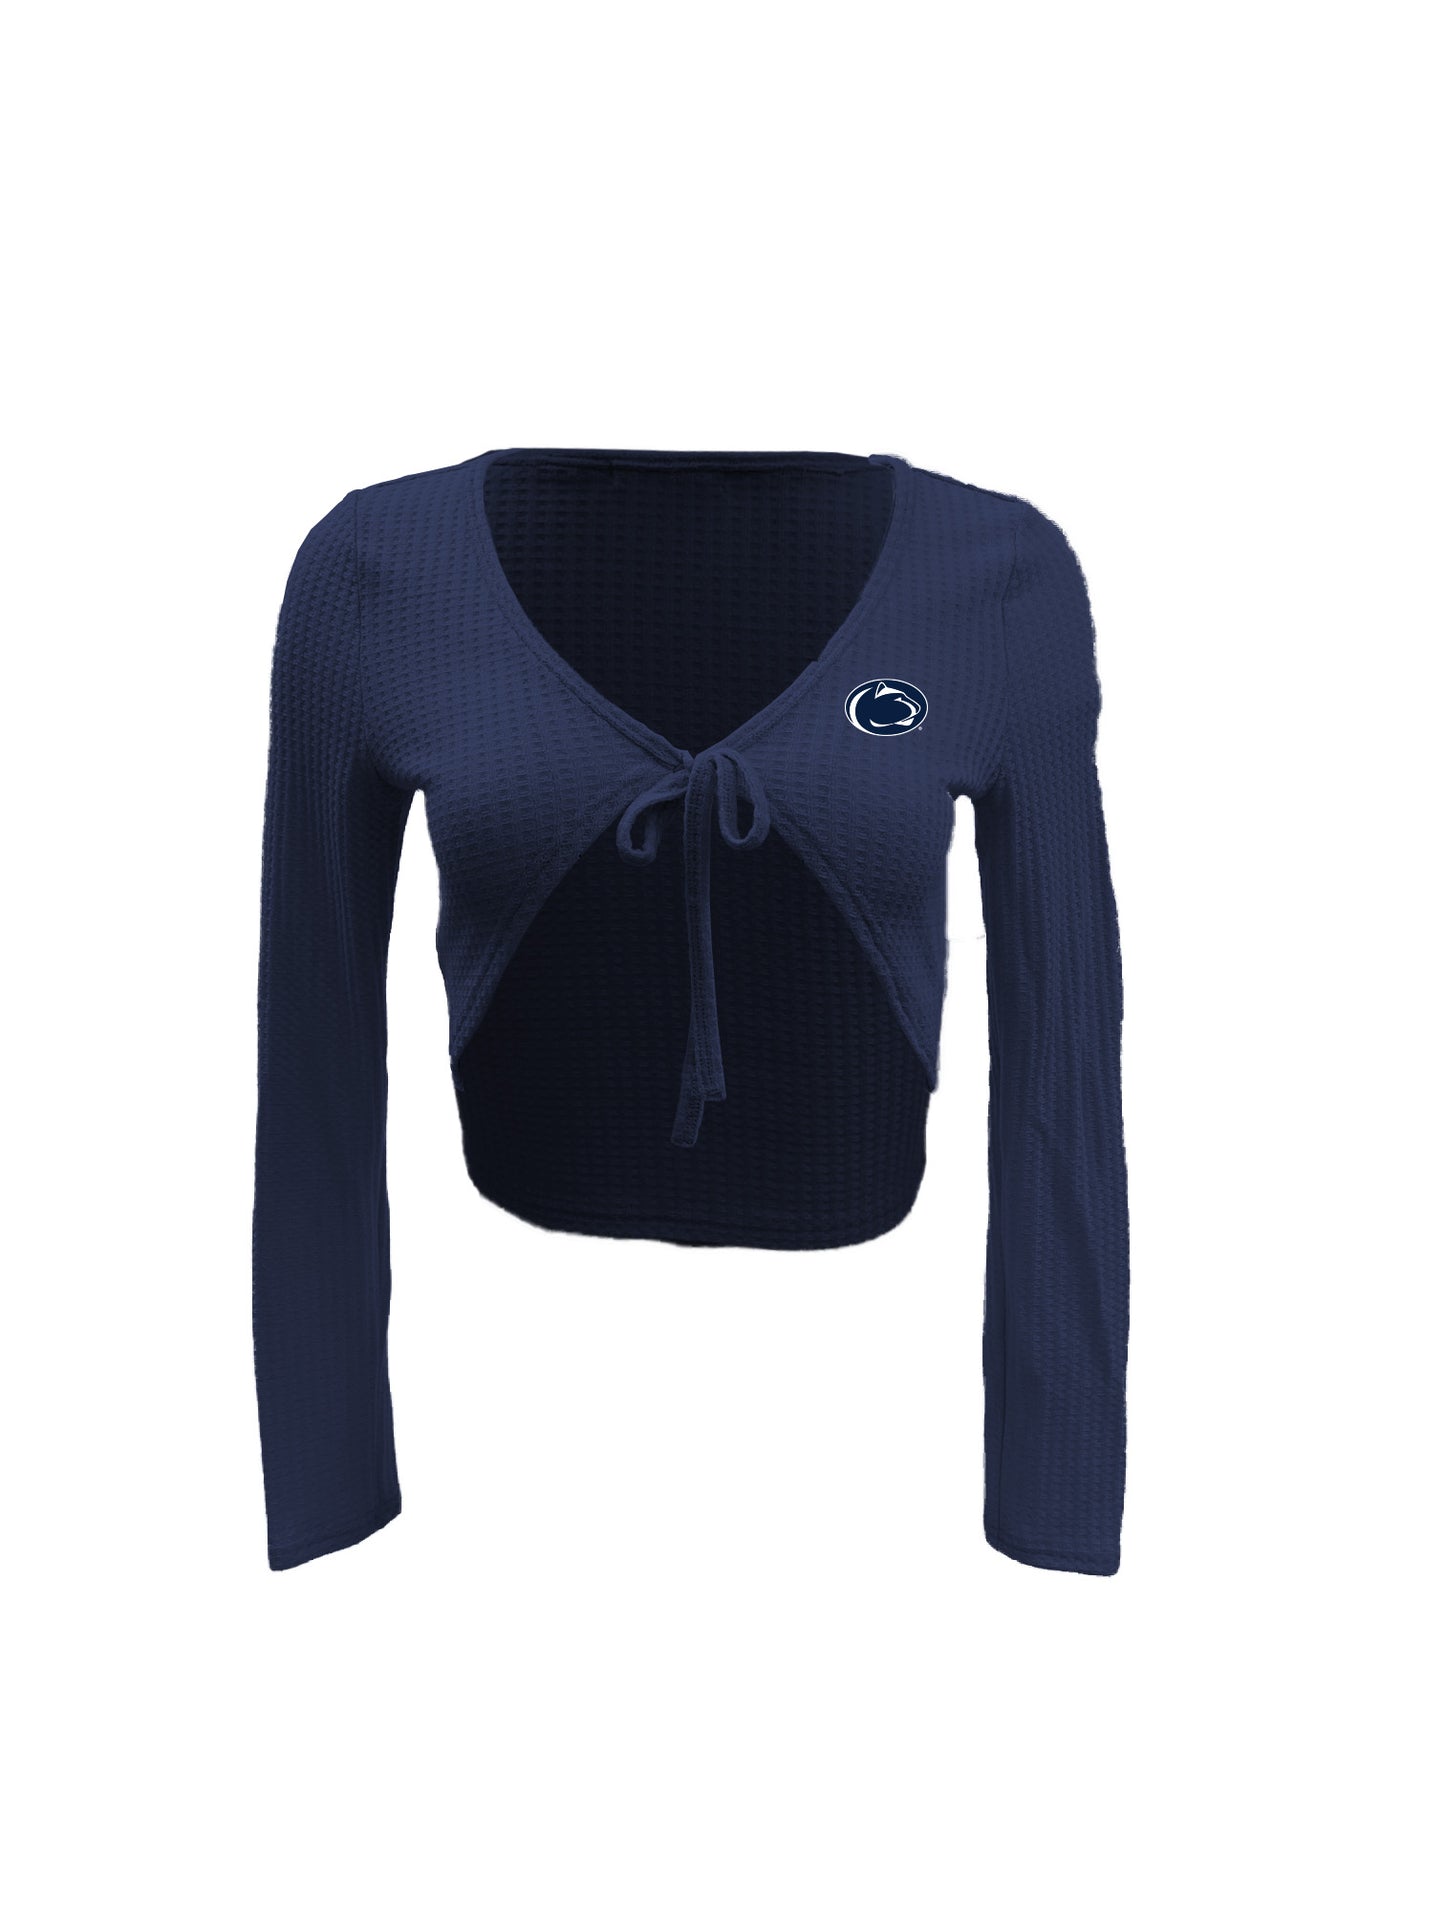 Penn State Nittany Lions Women's Wes and Willy Long Sleeve Tie Front Crop Top